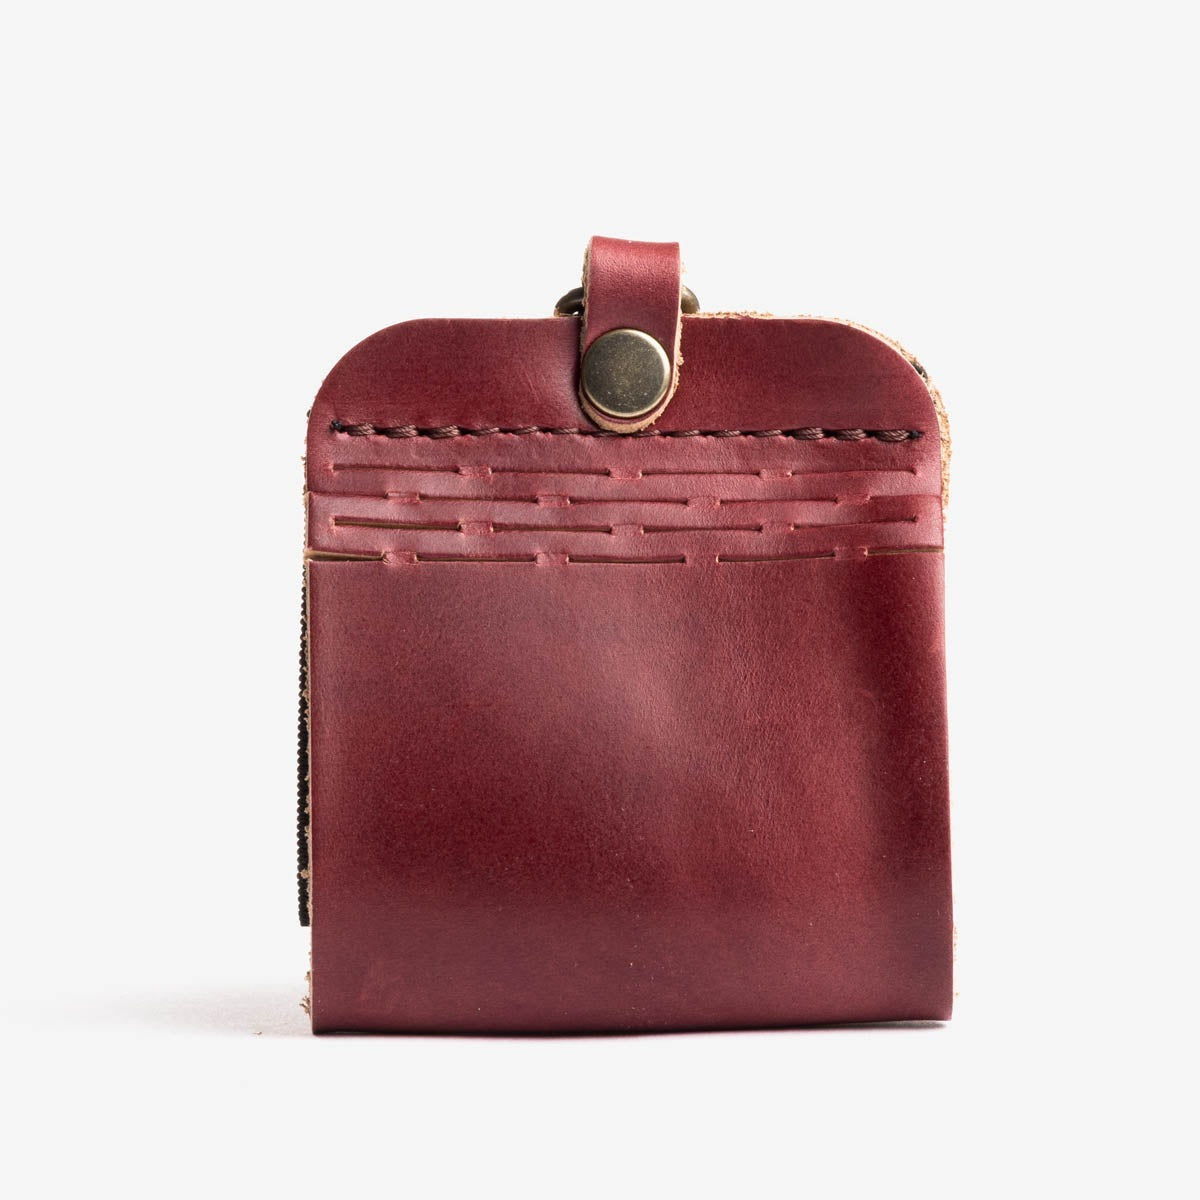 Premium leather red interior brown bag with wallet wholesale